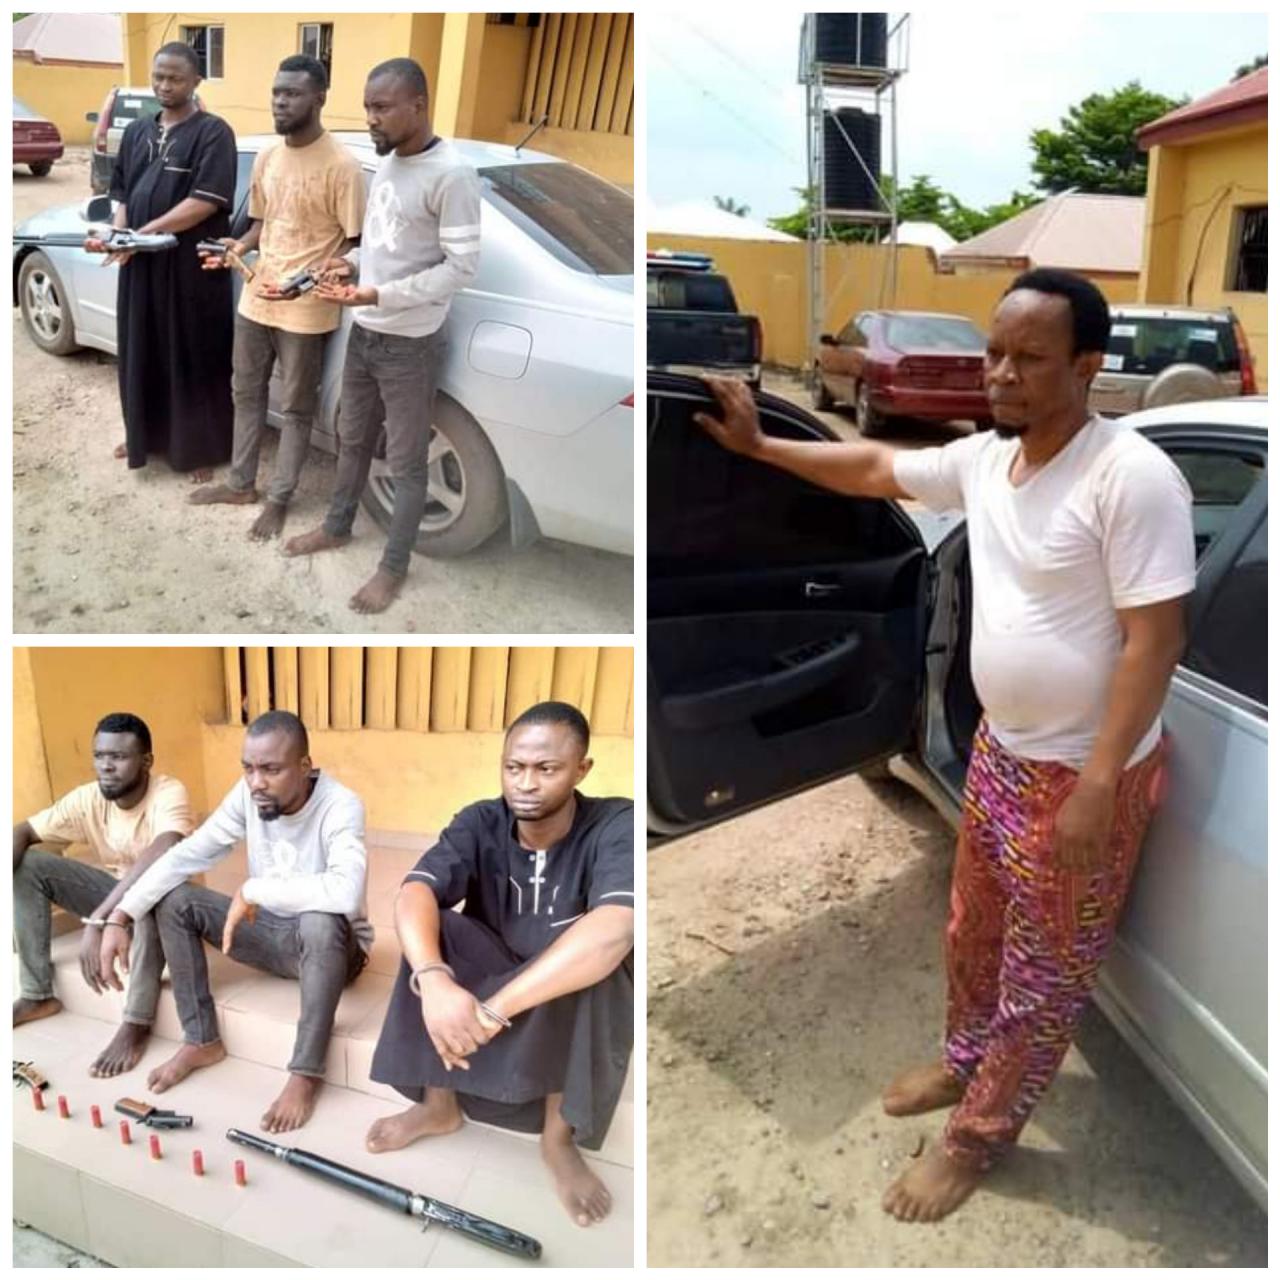 Police arrest armed robbery suspects in Nasarawa, recover firearms and stolen vehicle